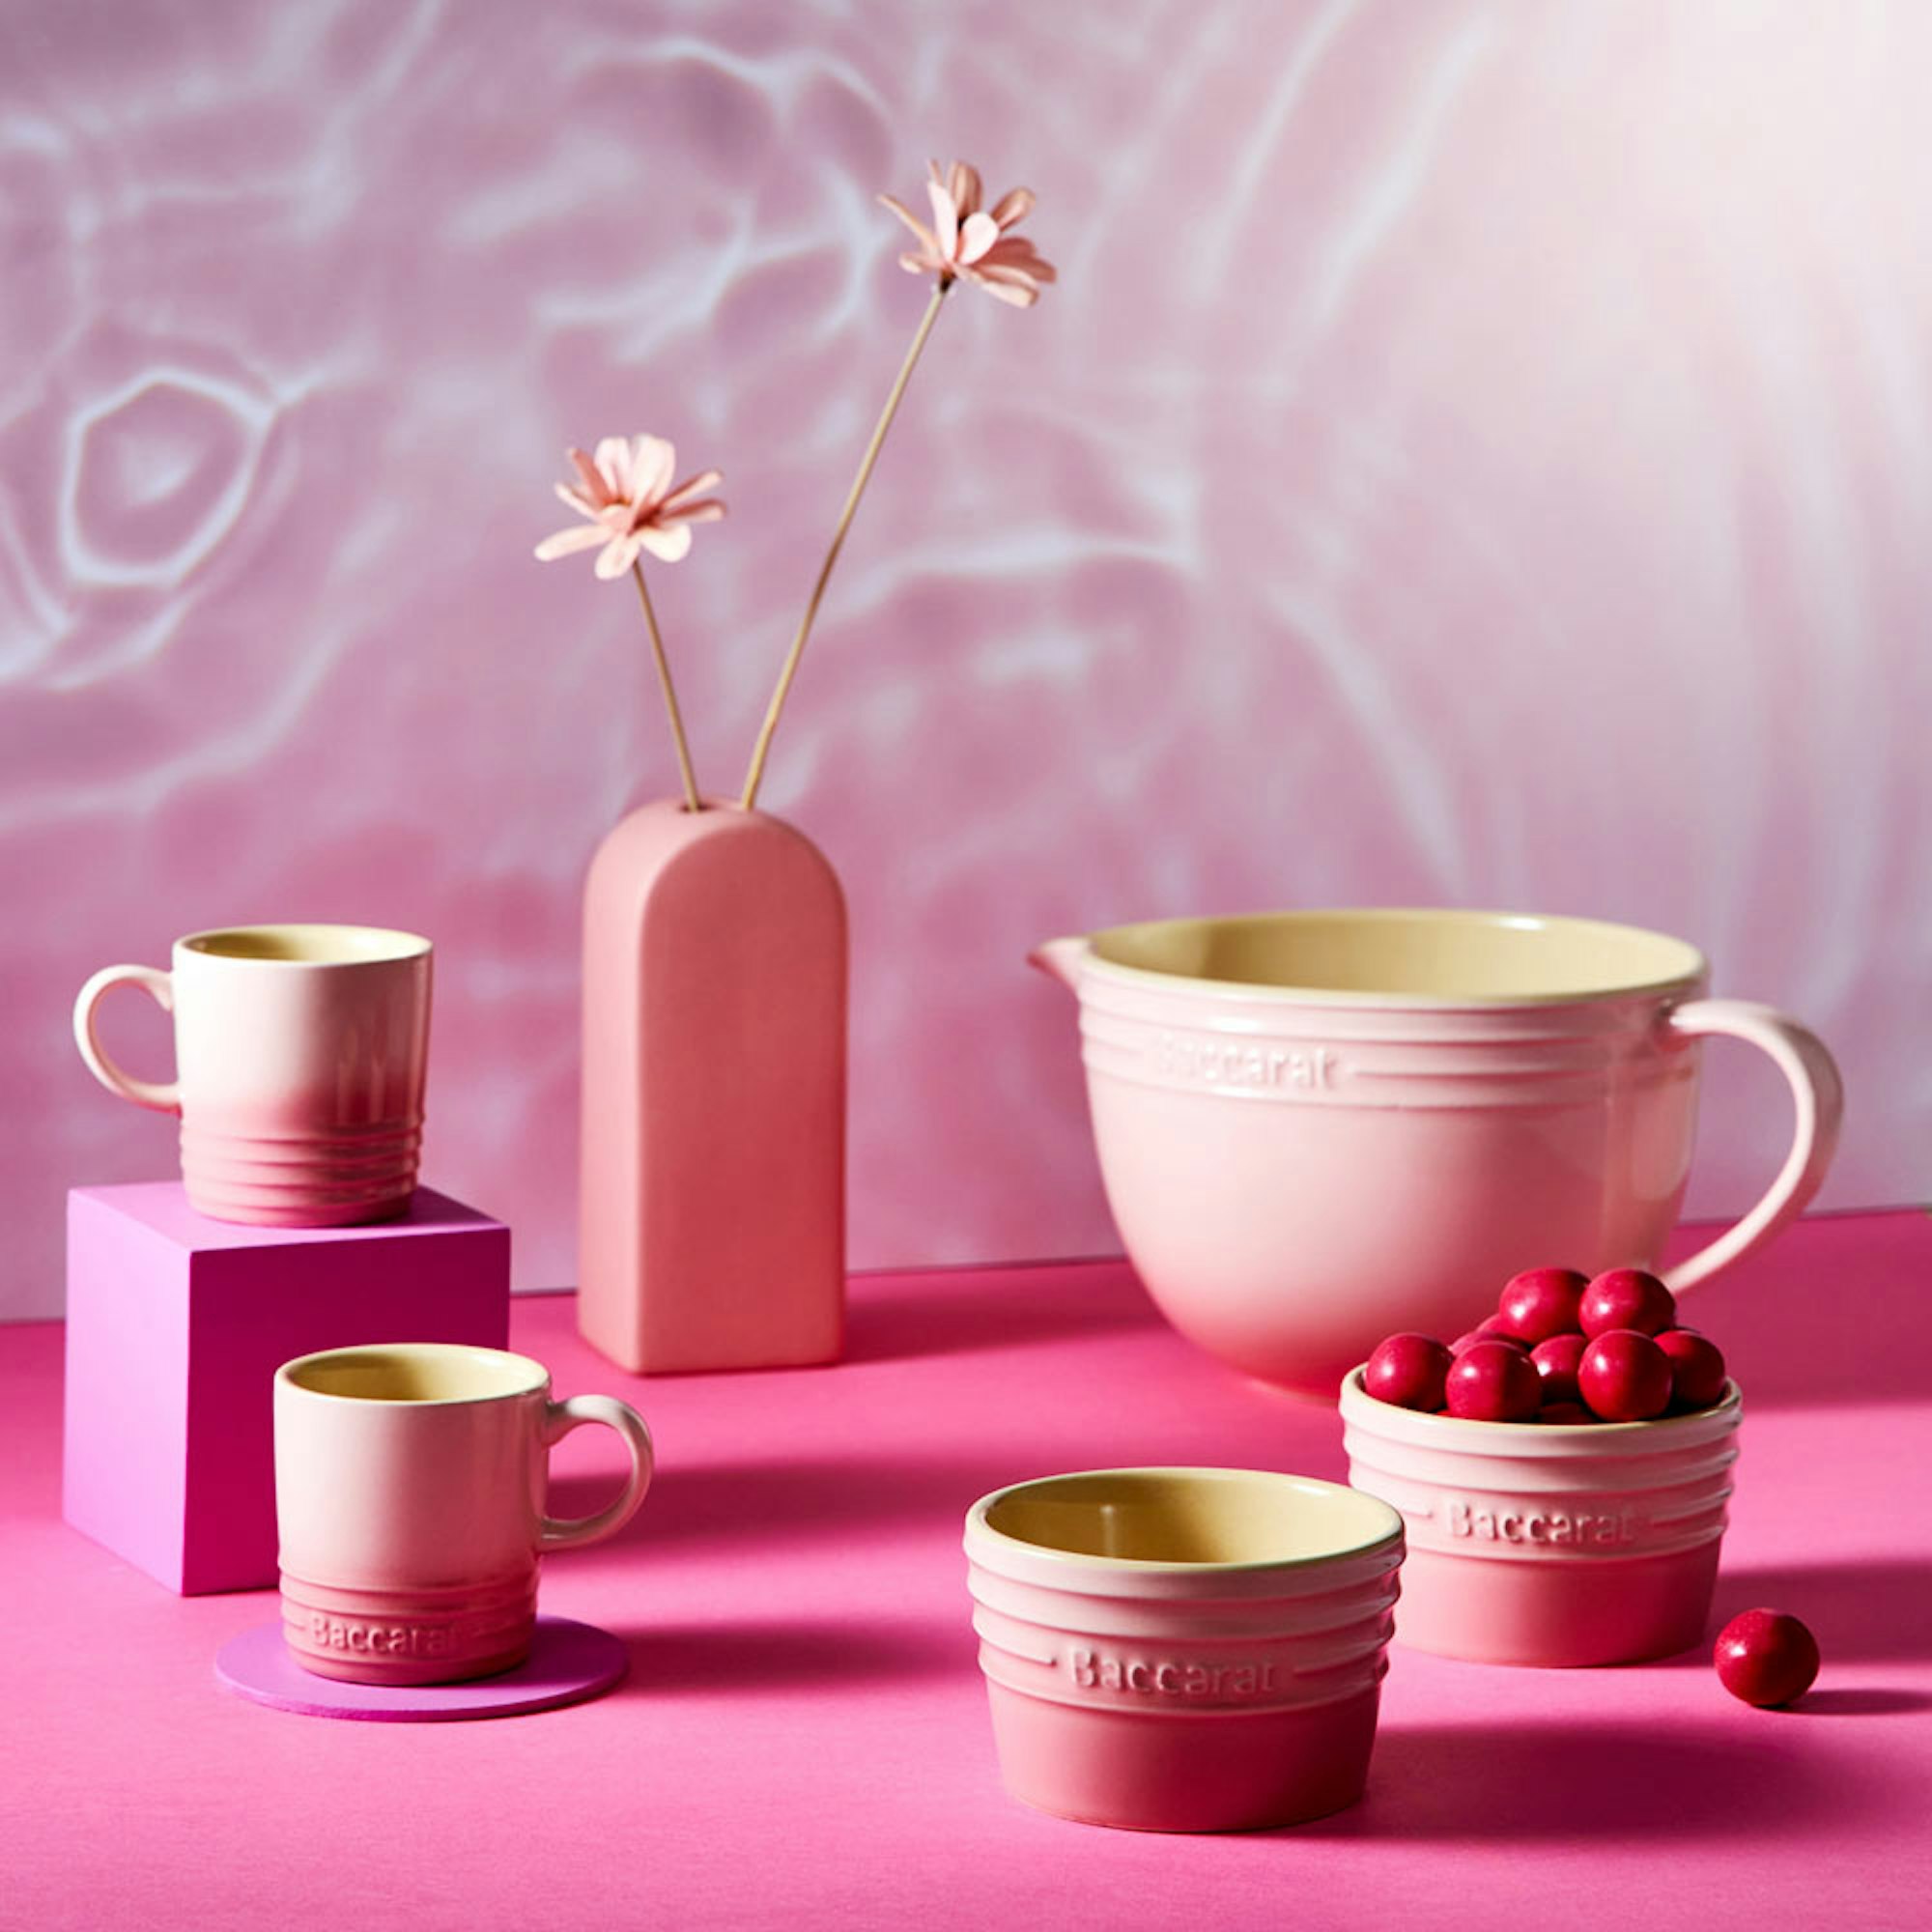 Baccarat Mixing Bowl Candy pink. Mother's day gift guide. Baccarat stoneware collection in pink